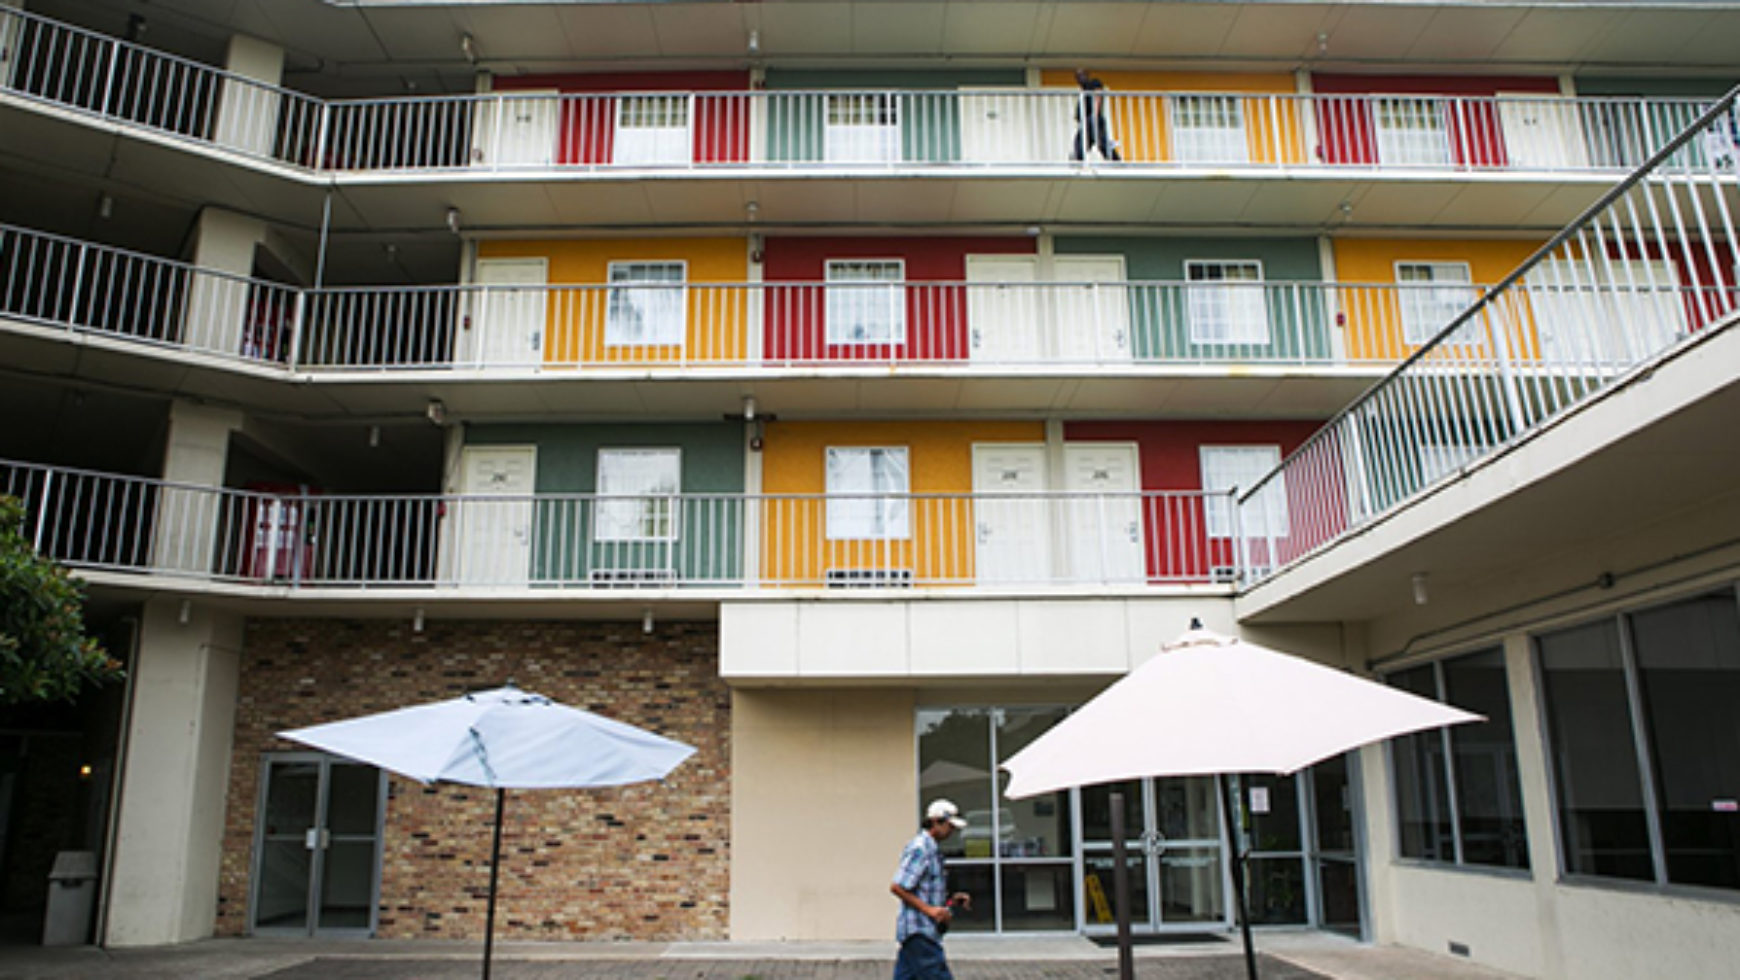 Houston’s solution to the homeless crisis: Housing — and lots of it